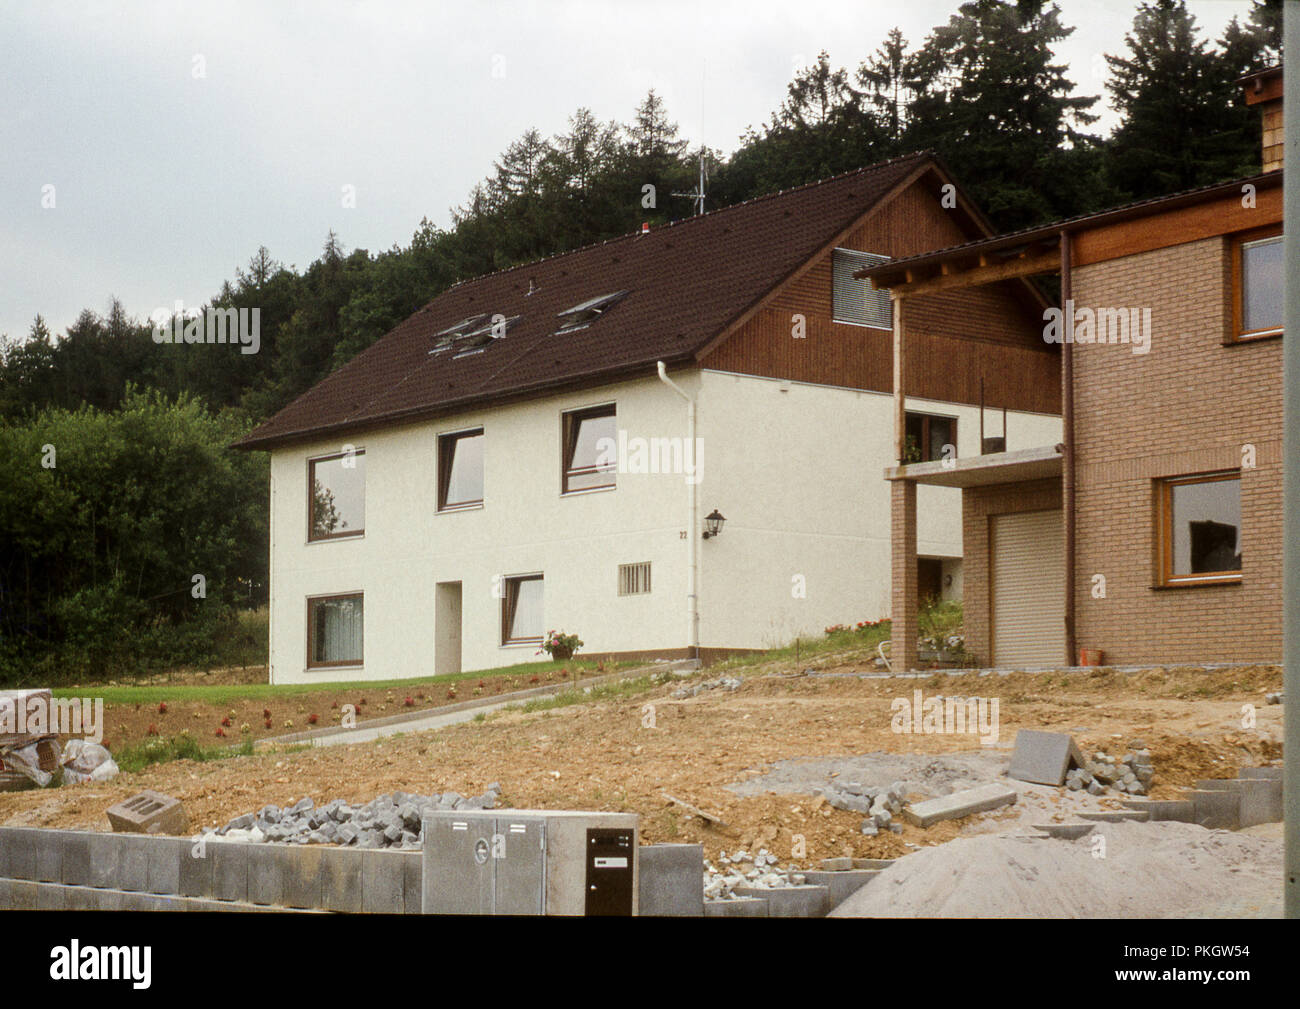 Archival image from the 1970s of a modern house being constructed in Oberjosbach, Niedernhausen Germany. Stock Photo